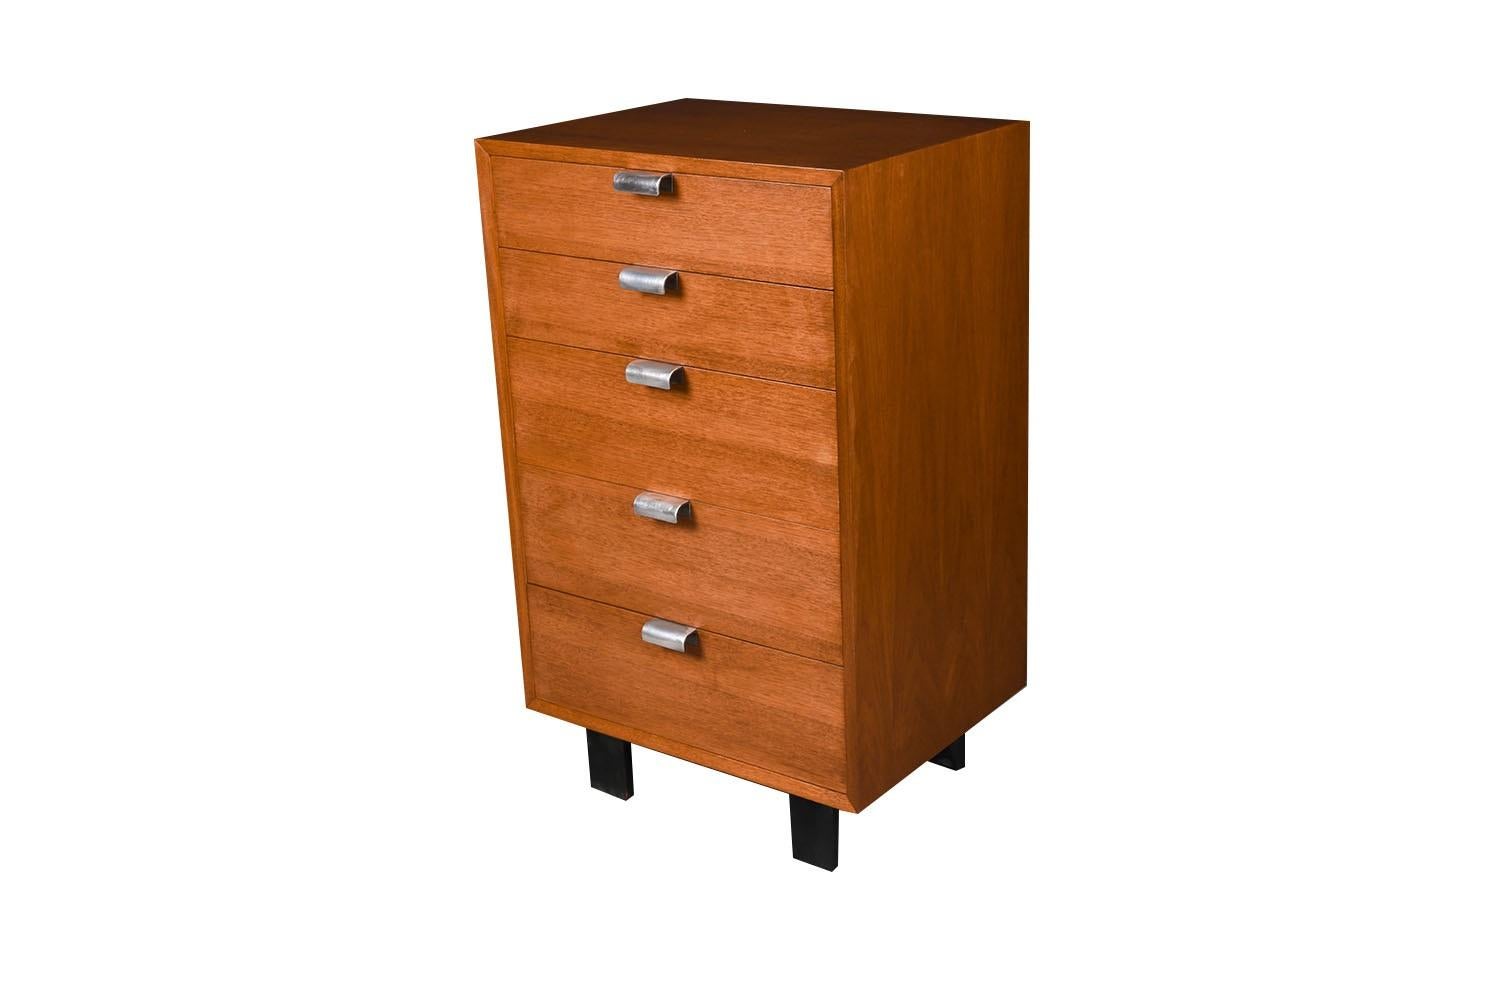 Iconic and classic Mid-Century Modern tall five drawer dresser designed by George Nelson for the Herman Miller Primavera line, circa 1950s. Iconic piece resulting from the collaboration of these two MCM Masters! Often referred to as the Primavera